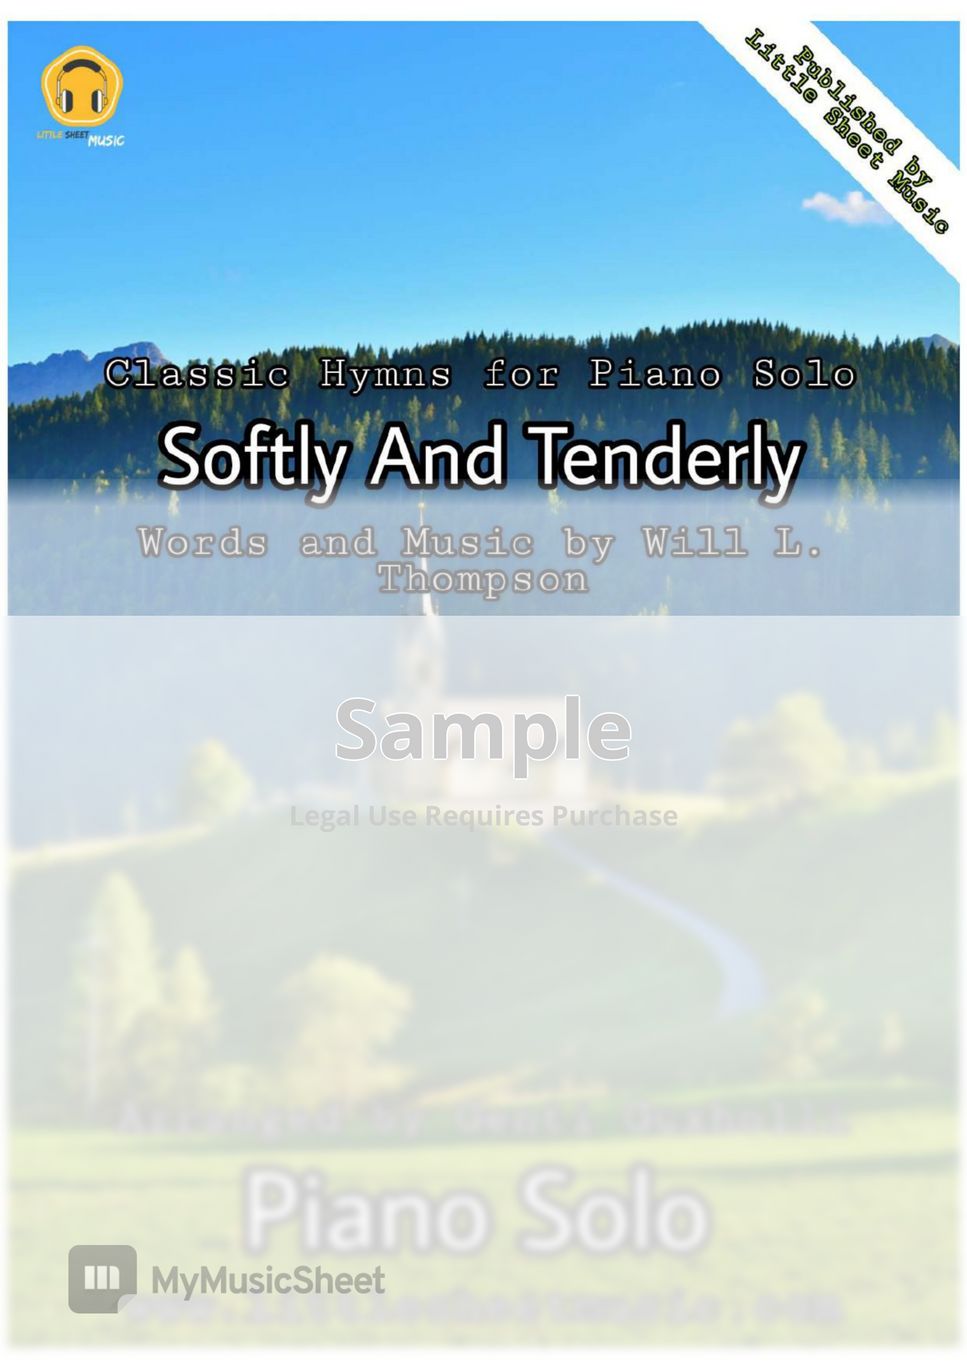 Will L. Thompson - Softly and Tenderly by Genti Guxholli